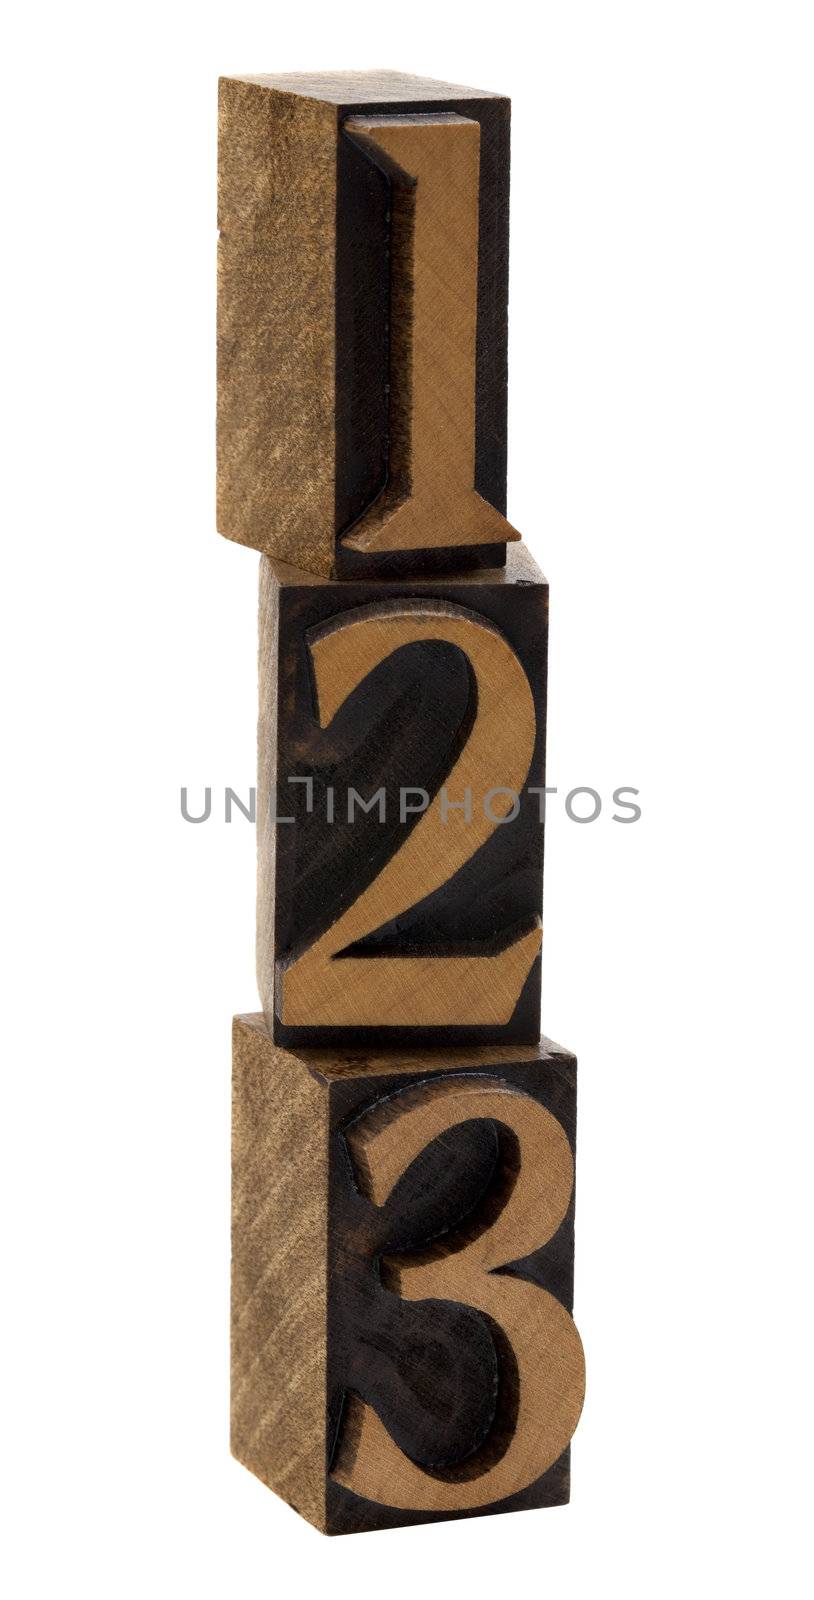 one, two, three wood numbers by PixelsAway